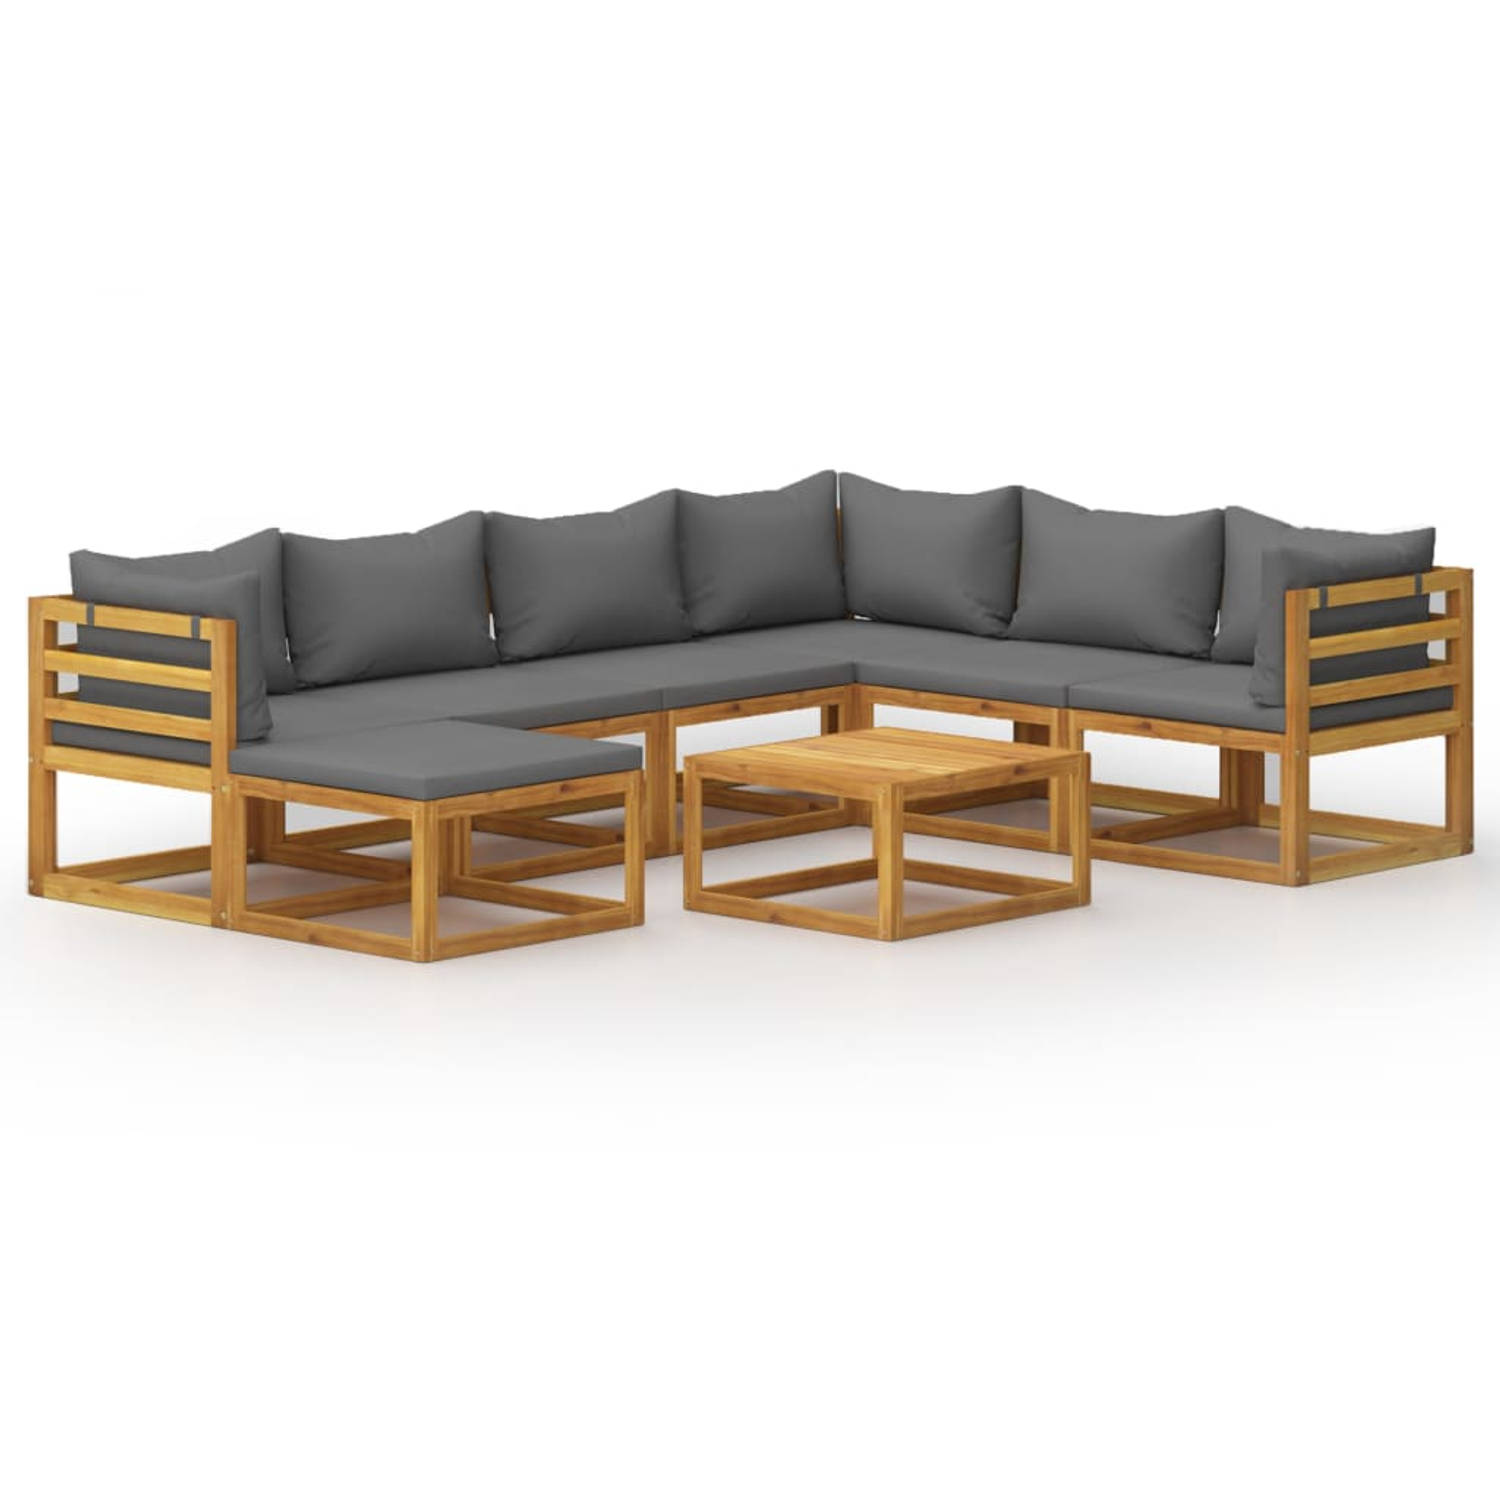 The Living Store 8-delige Loungeset met kussens massief acaciahout - Tuinset